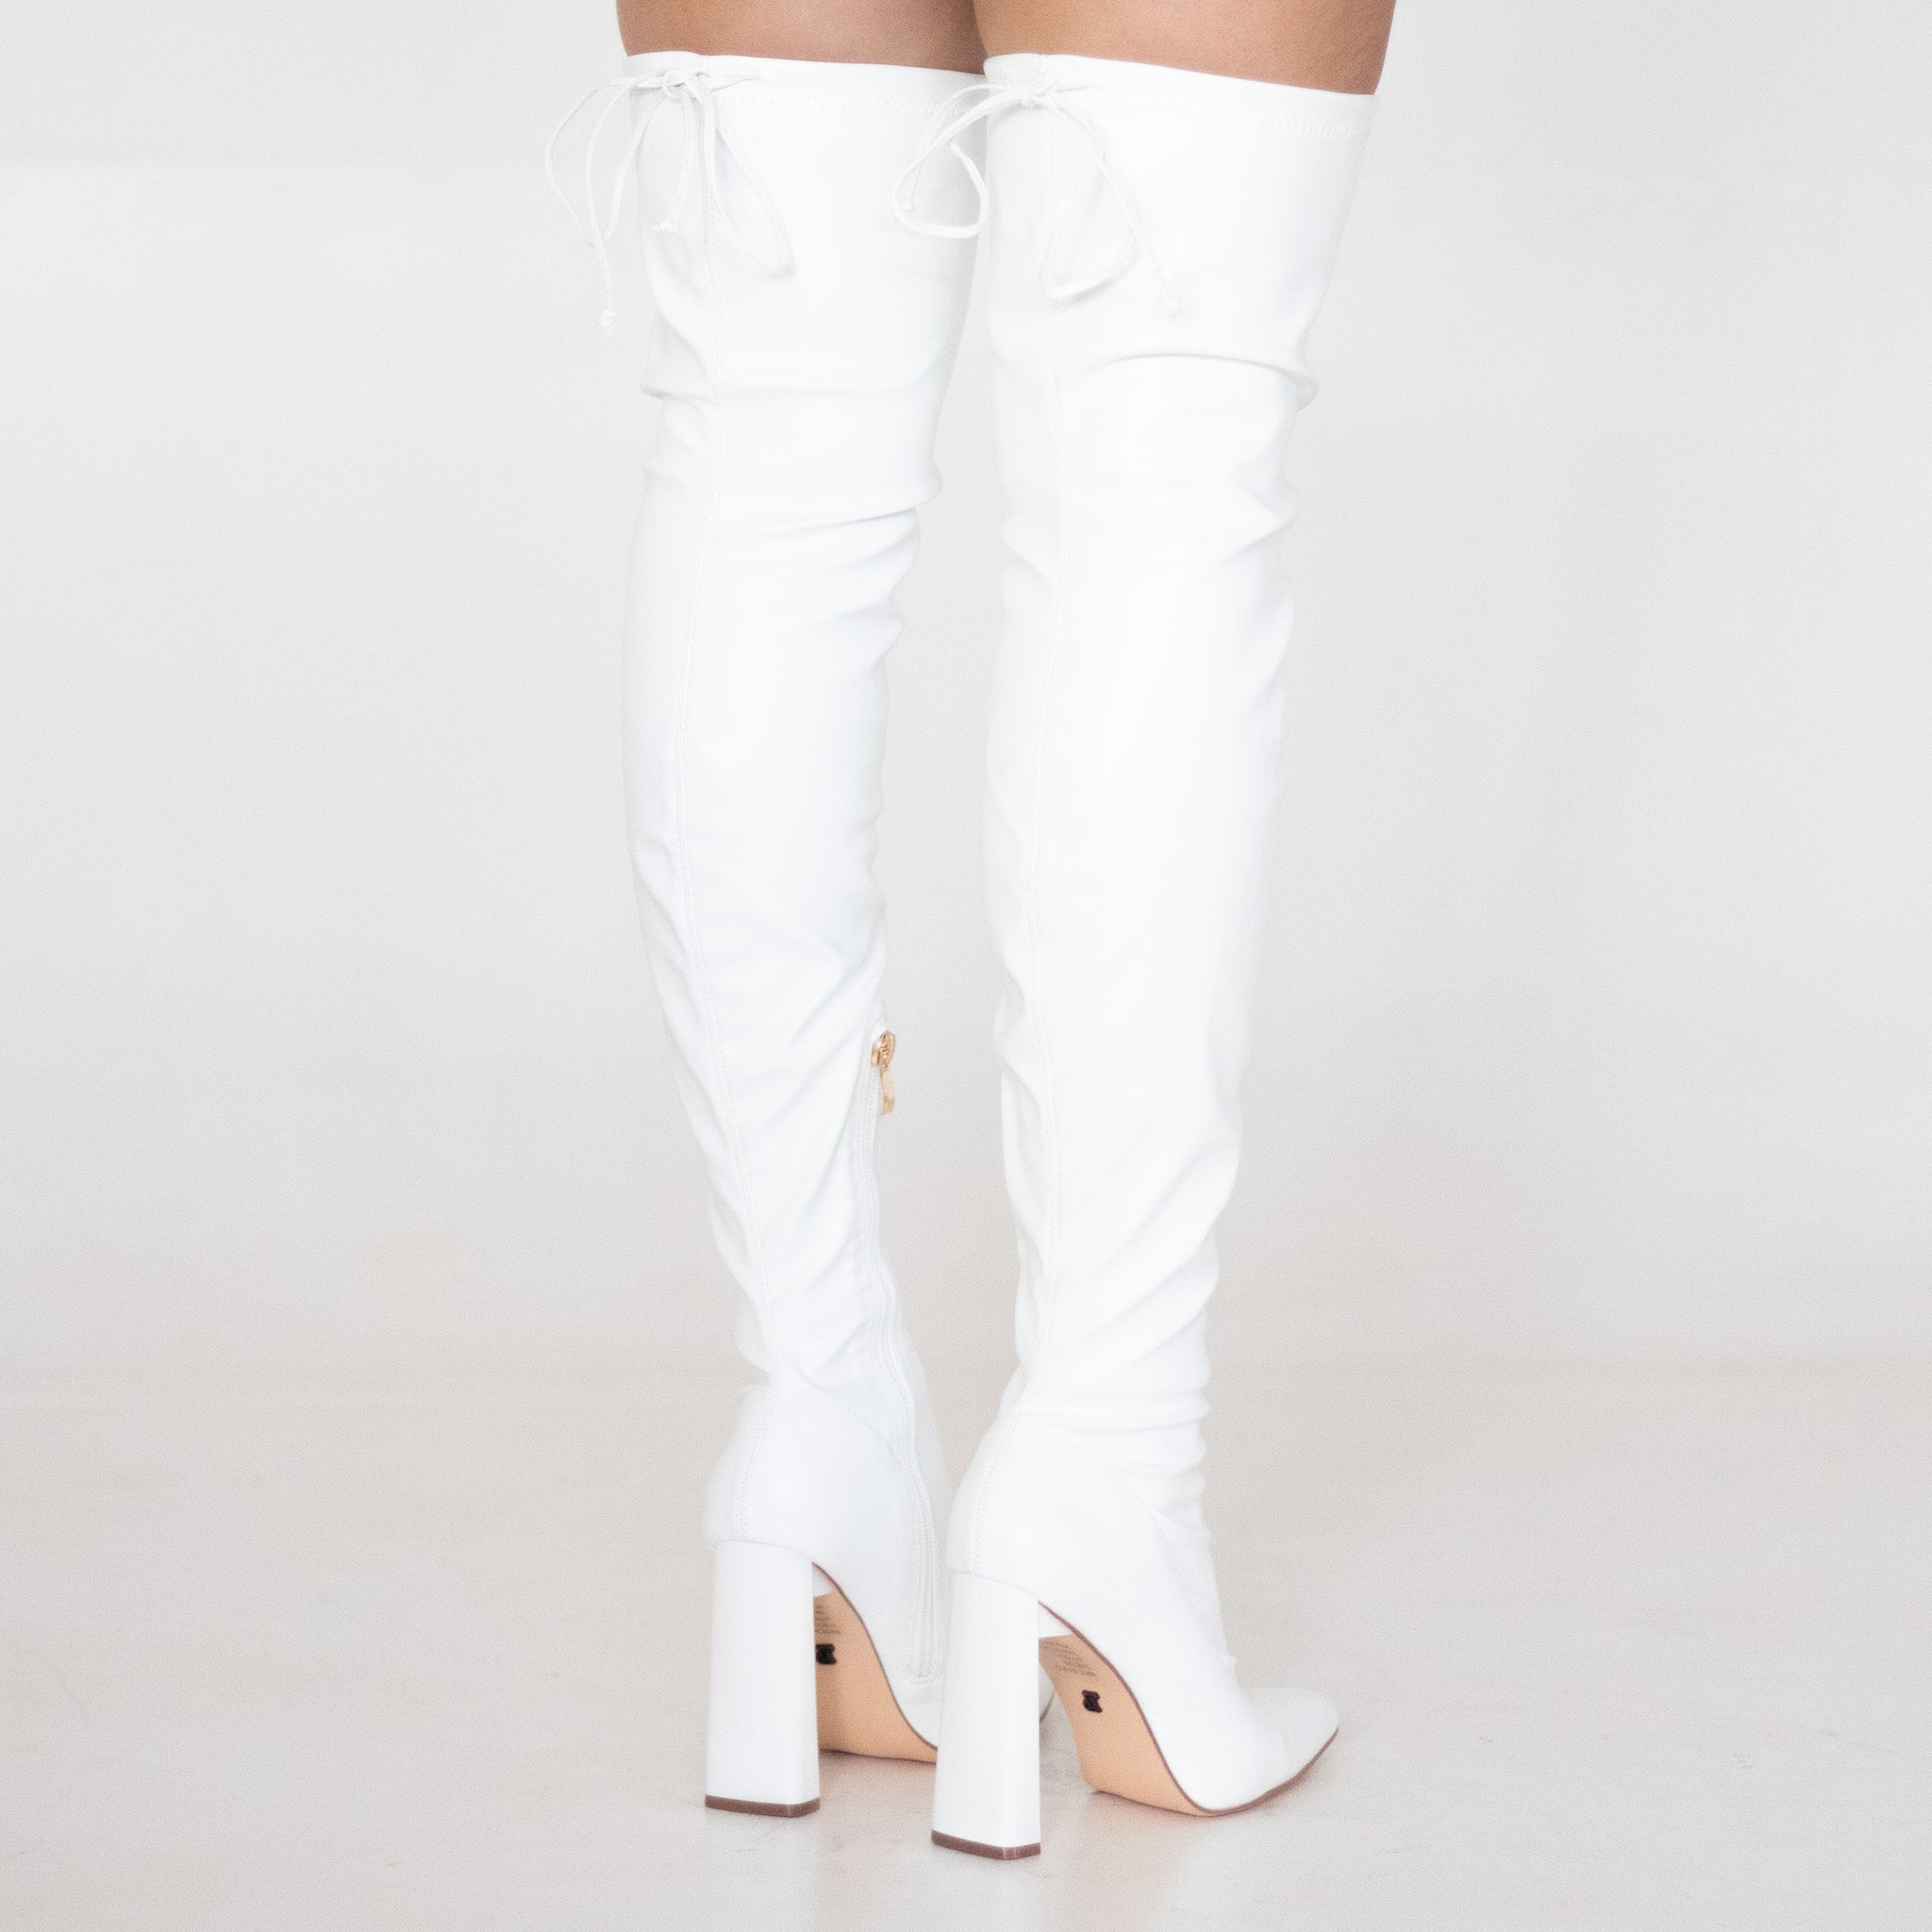 White thigh high pointy high 10.5cm heel boot tomian